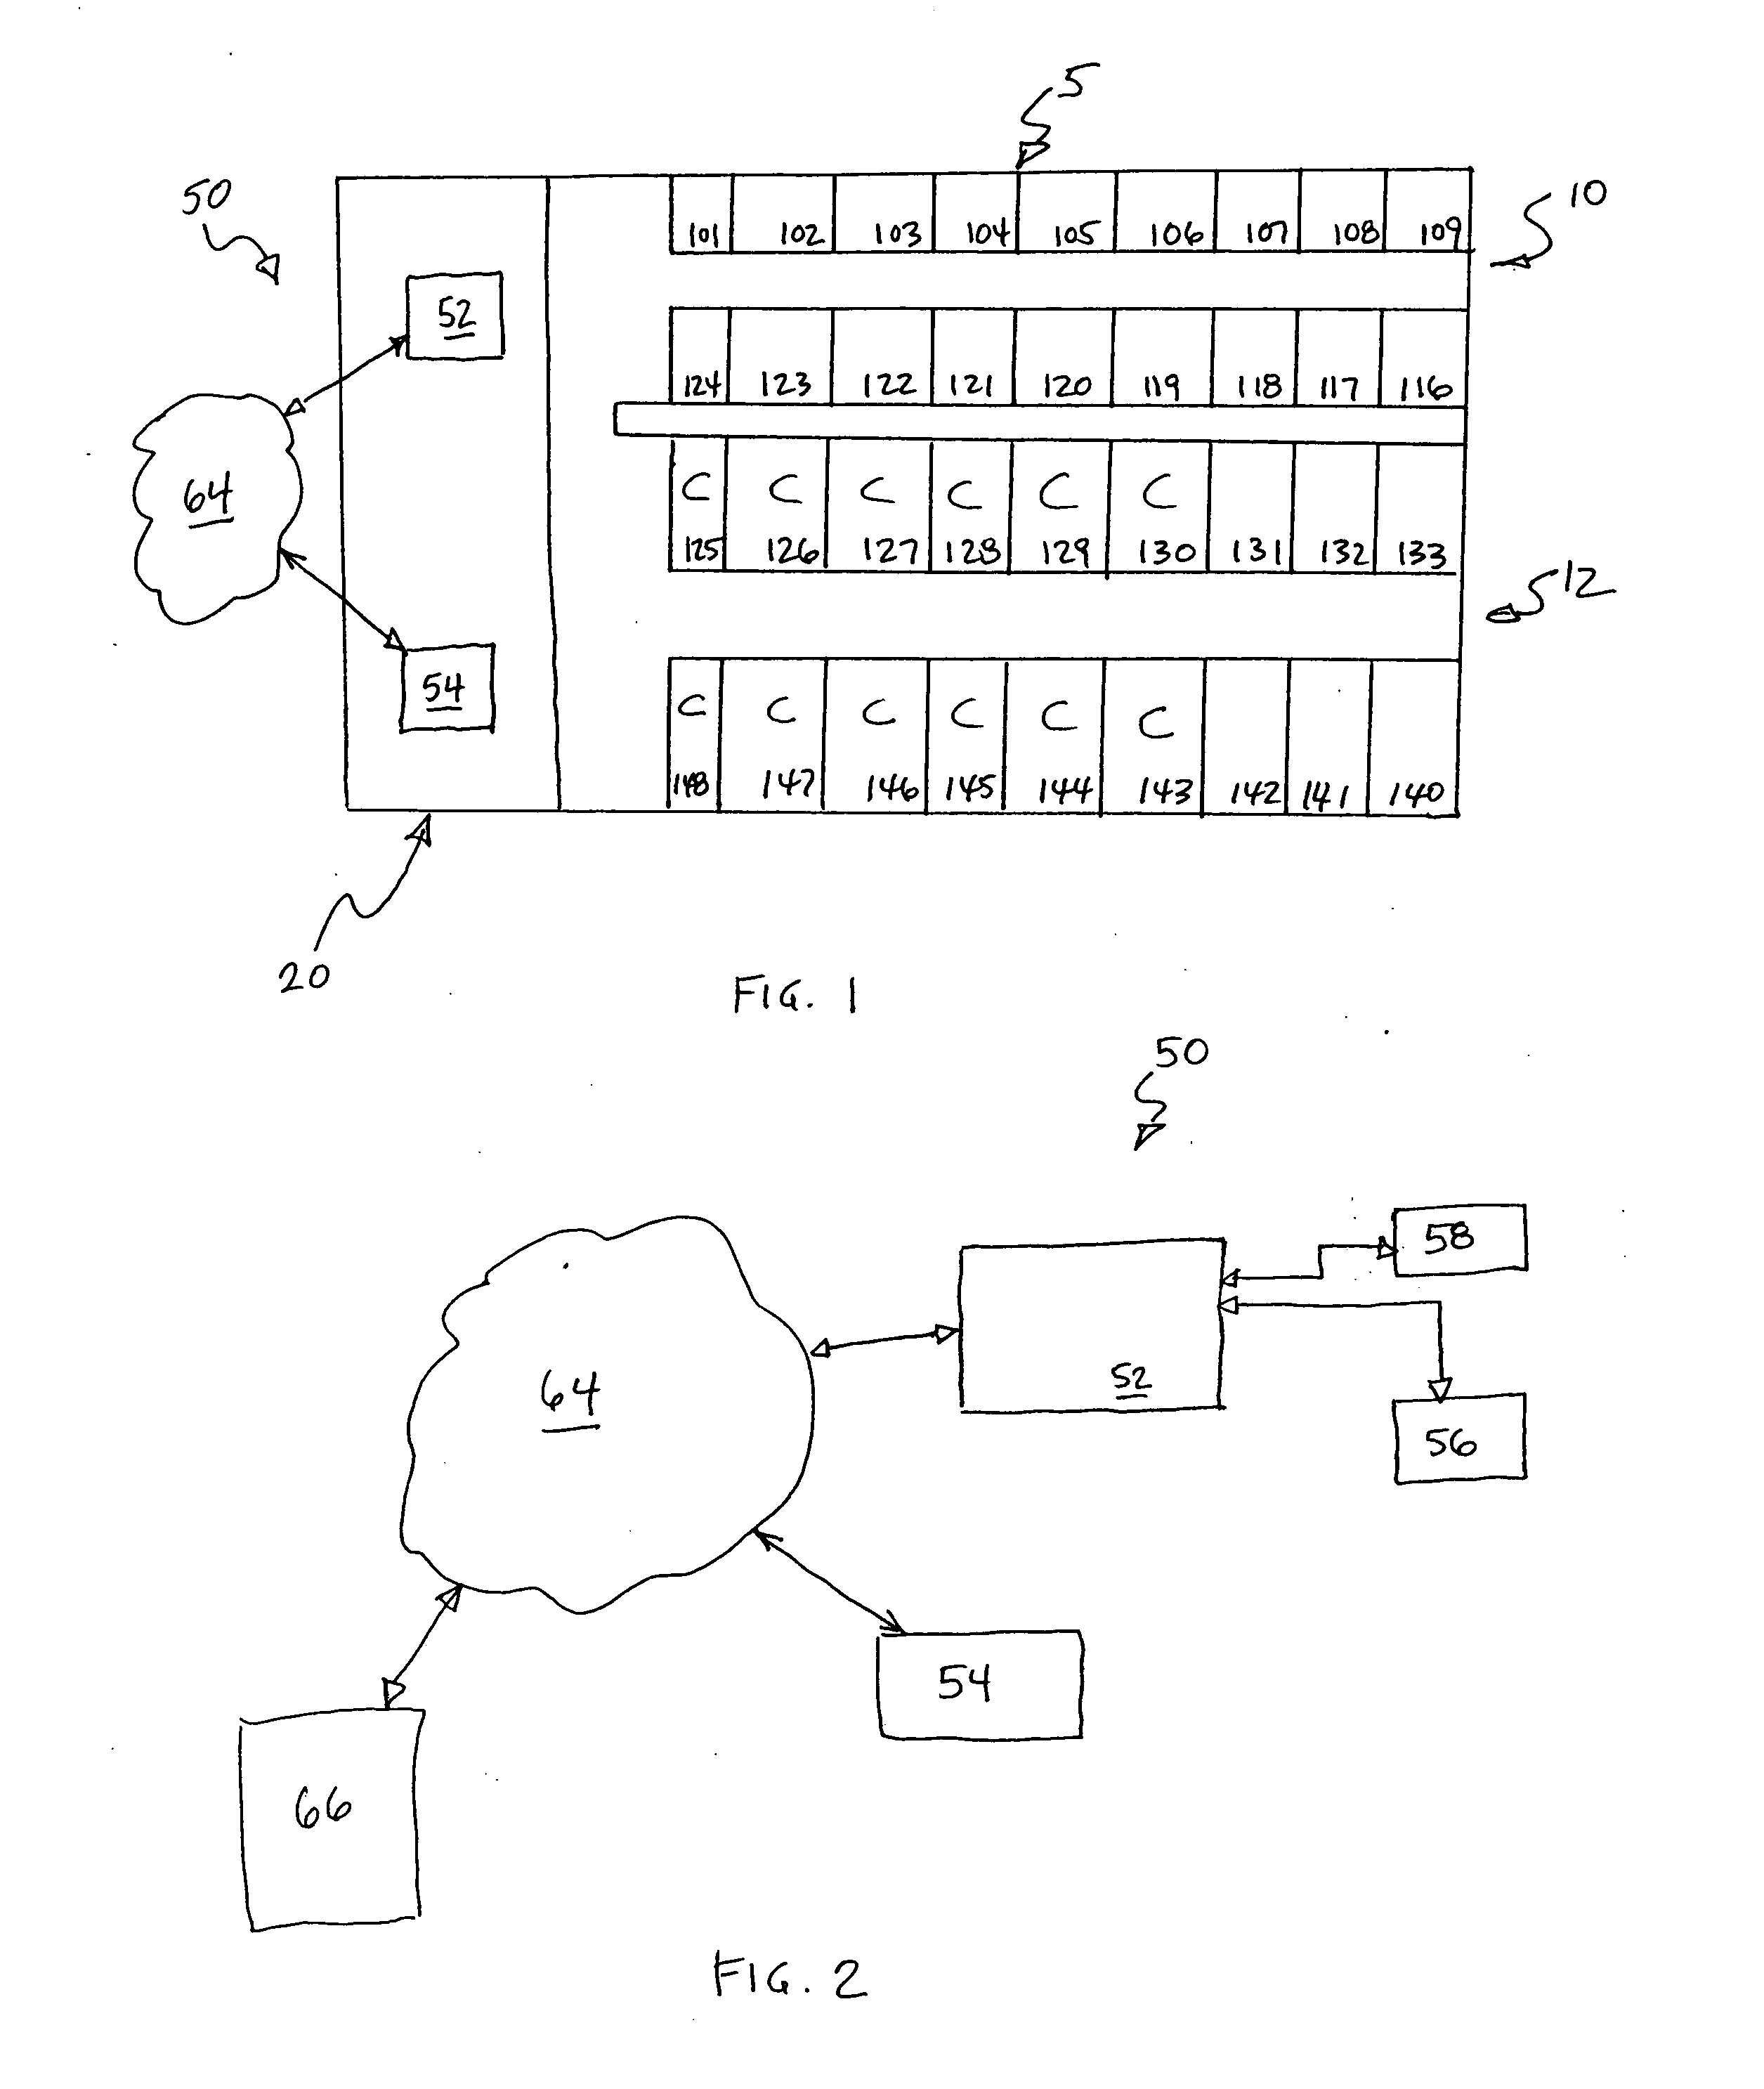 System and method for displaying the census of a healthcare facility